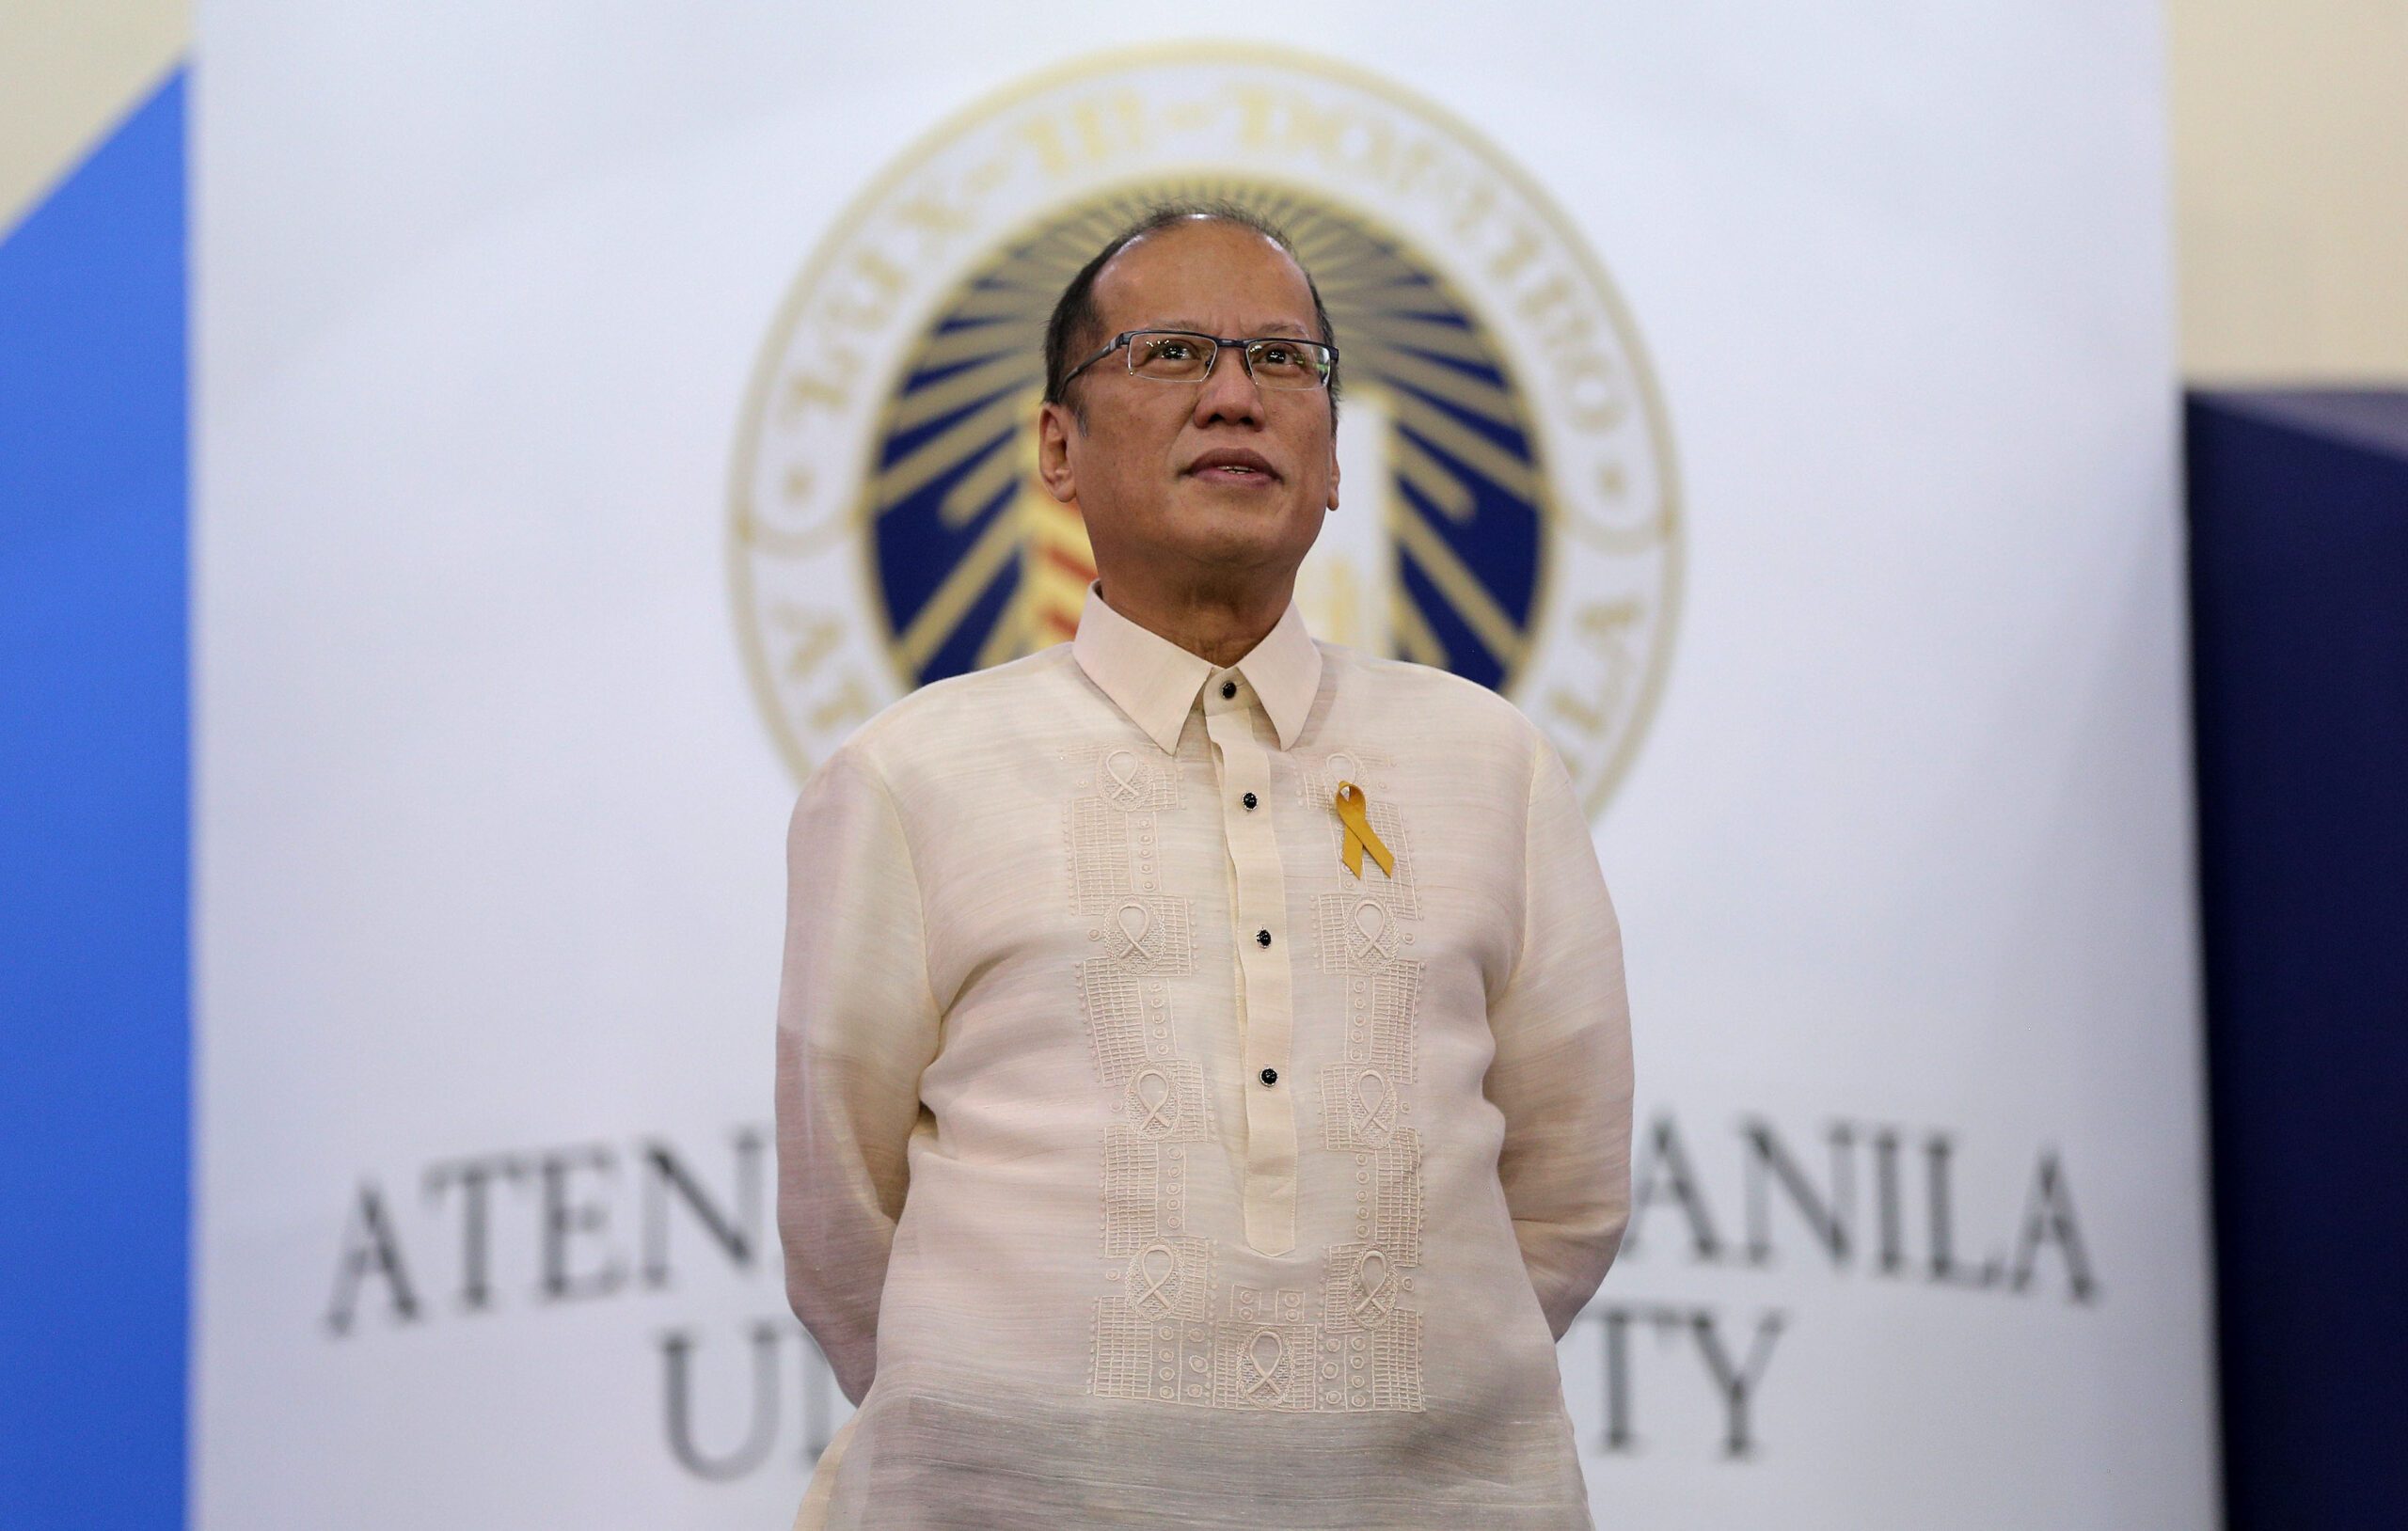 Aquino relives college days, thanks Ateneo for help